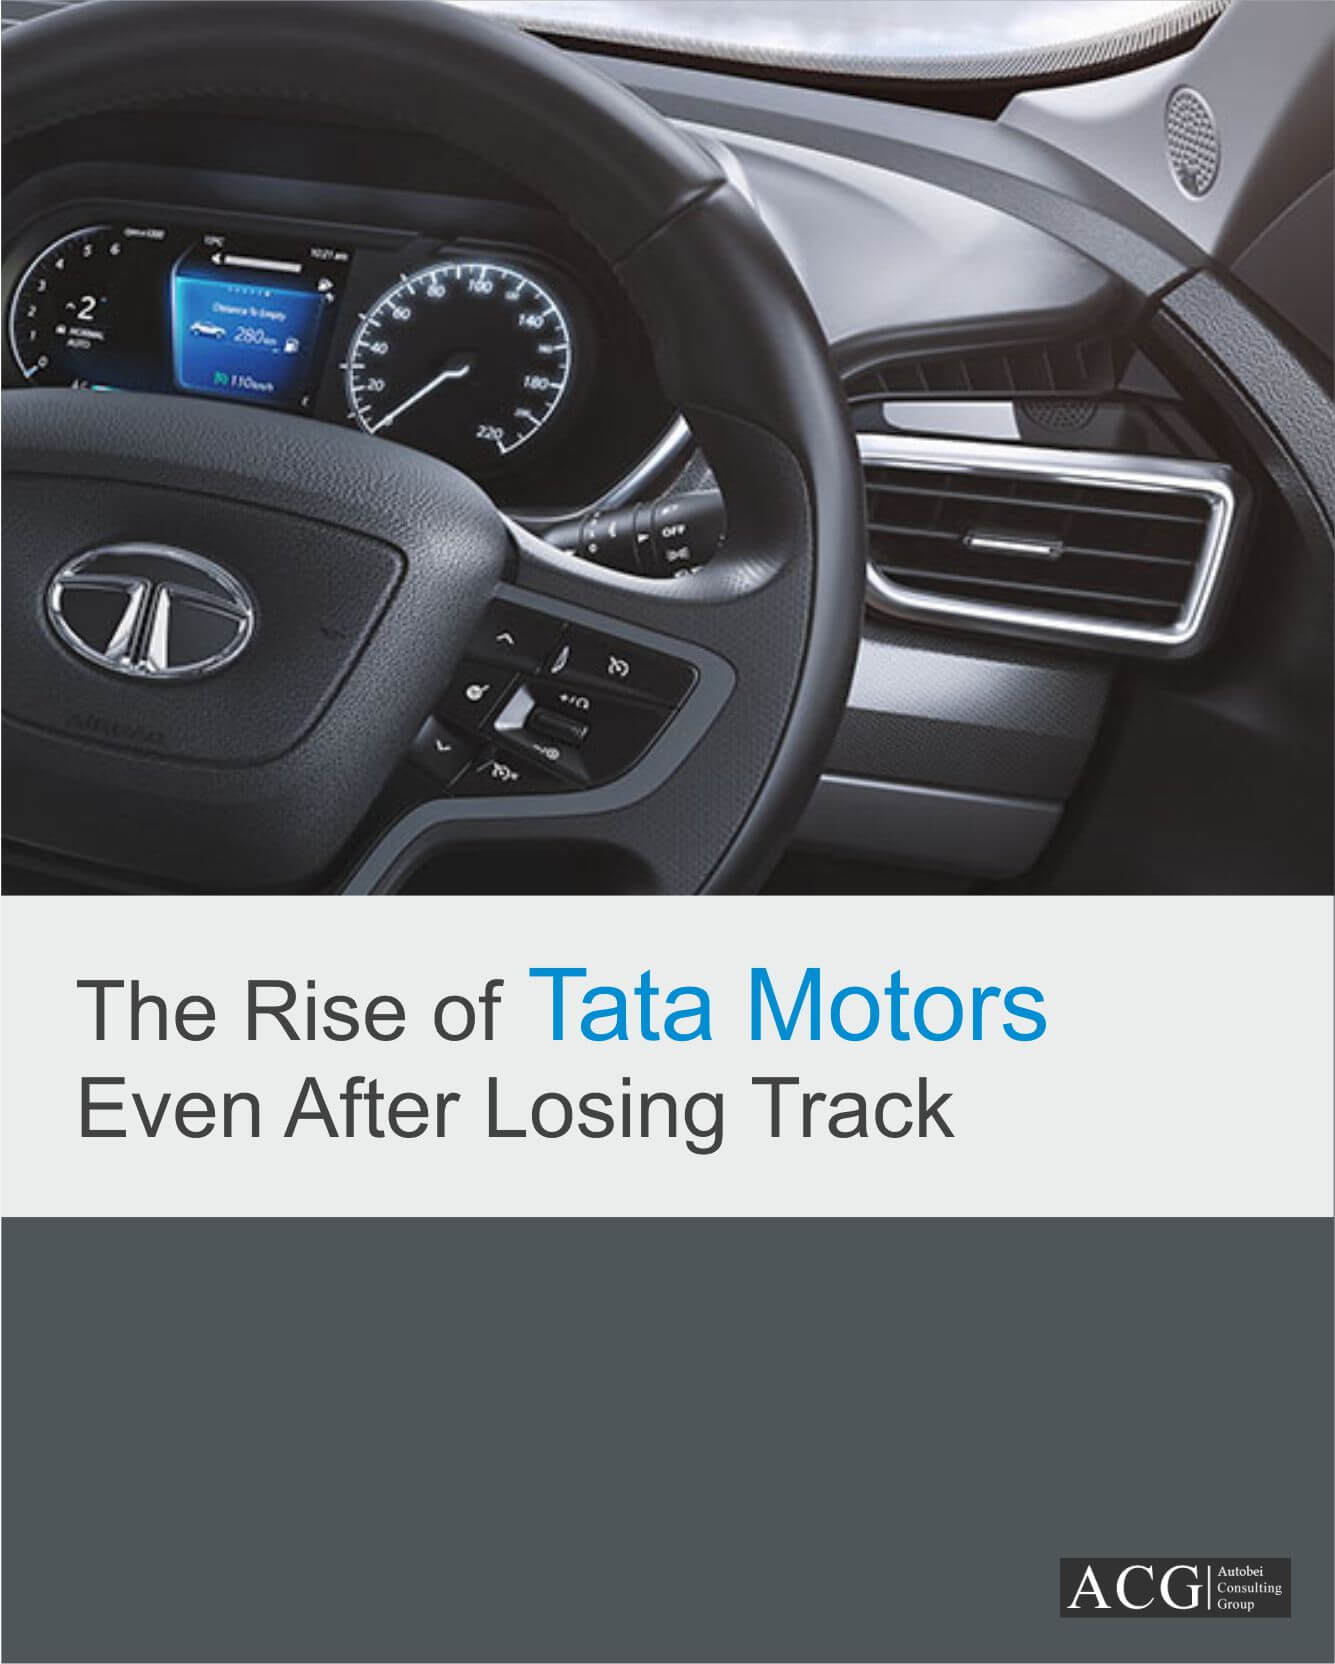 The Rise of Tata Motors Even After Losing Track